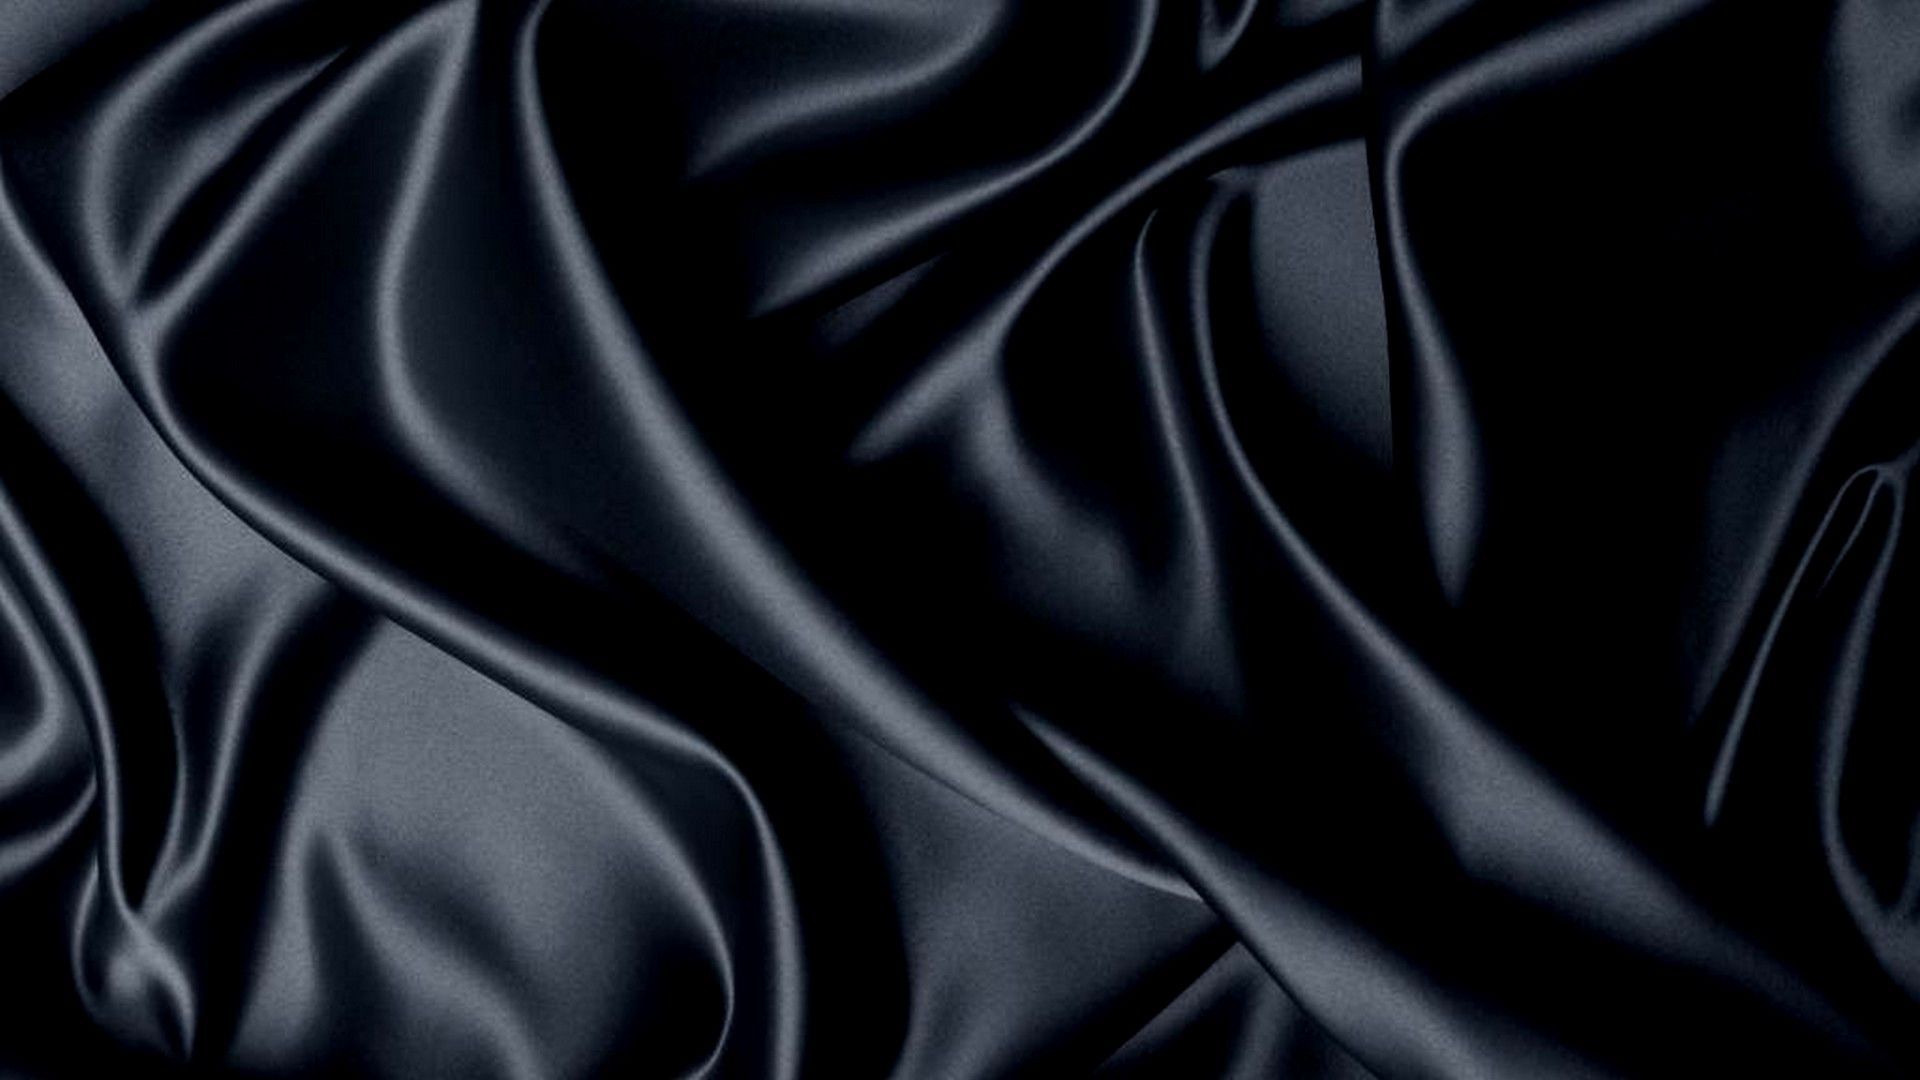 Black Silk Desktop Wallpaper with high-resolution 1920x1080 pixel. You can use this wallpaper for your Windows and Mac OS computers as well as your Android and iPhone smartphones - Silk